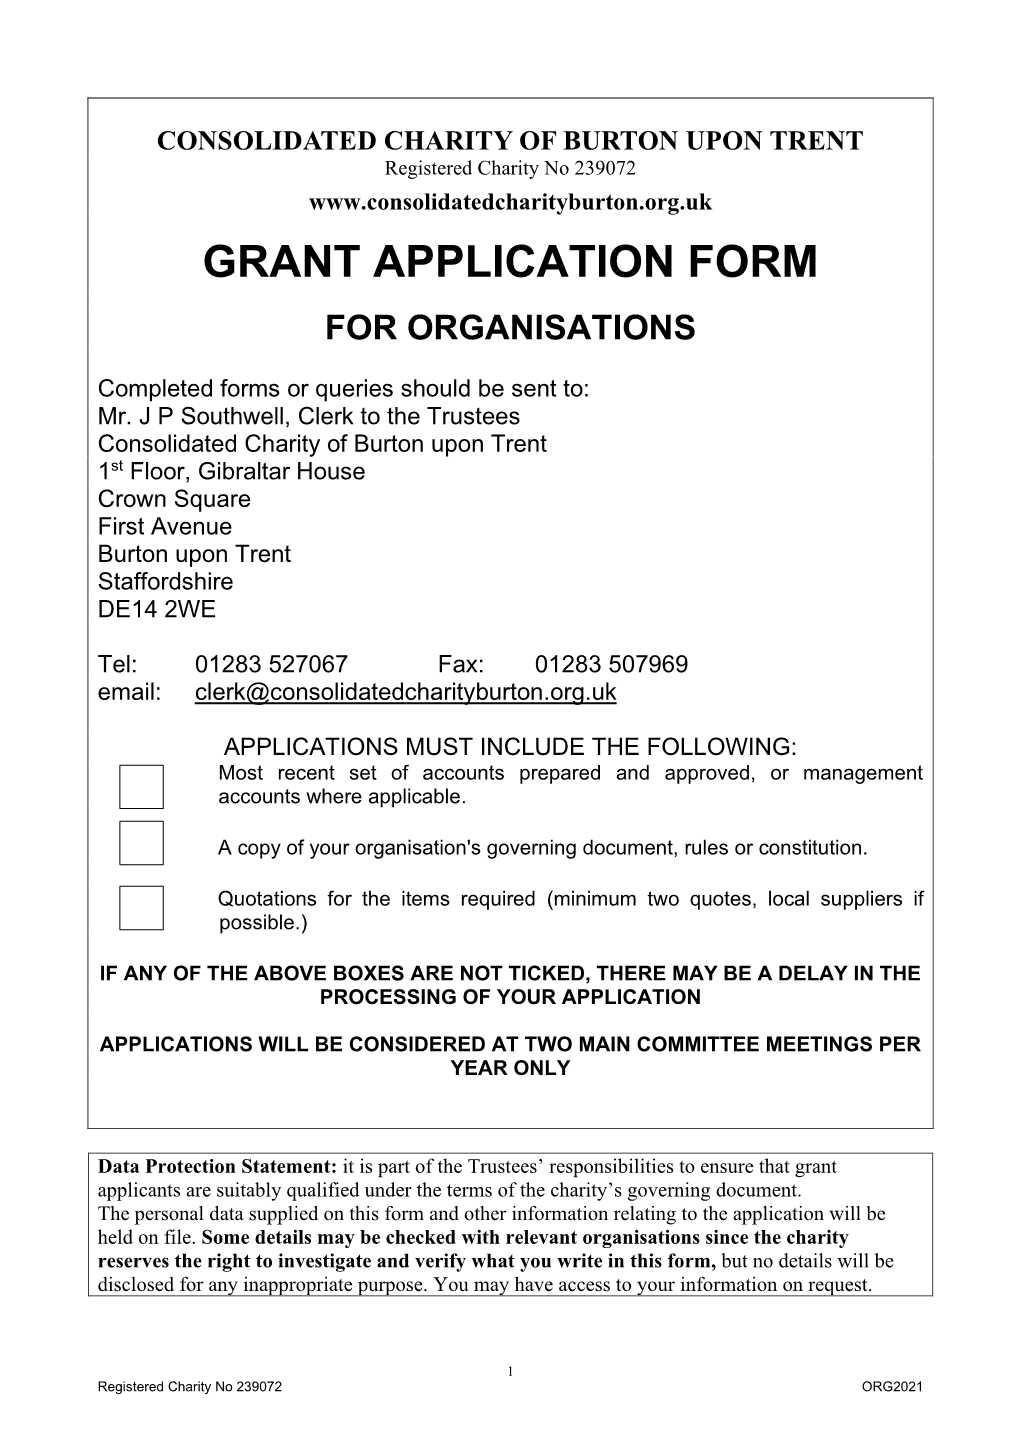 GRANT APPLICATION FORM for Organisations